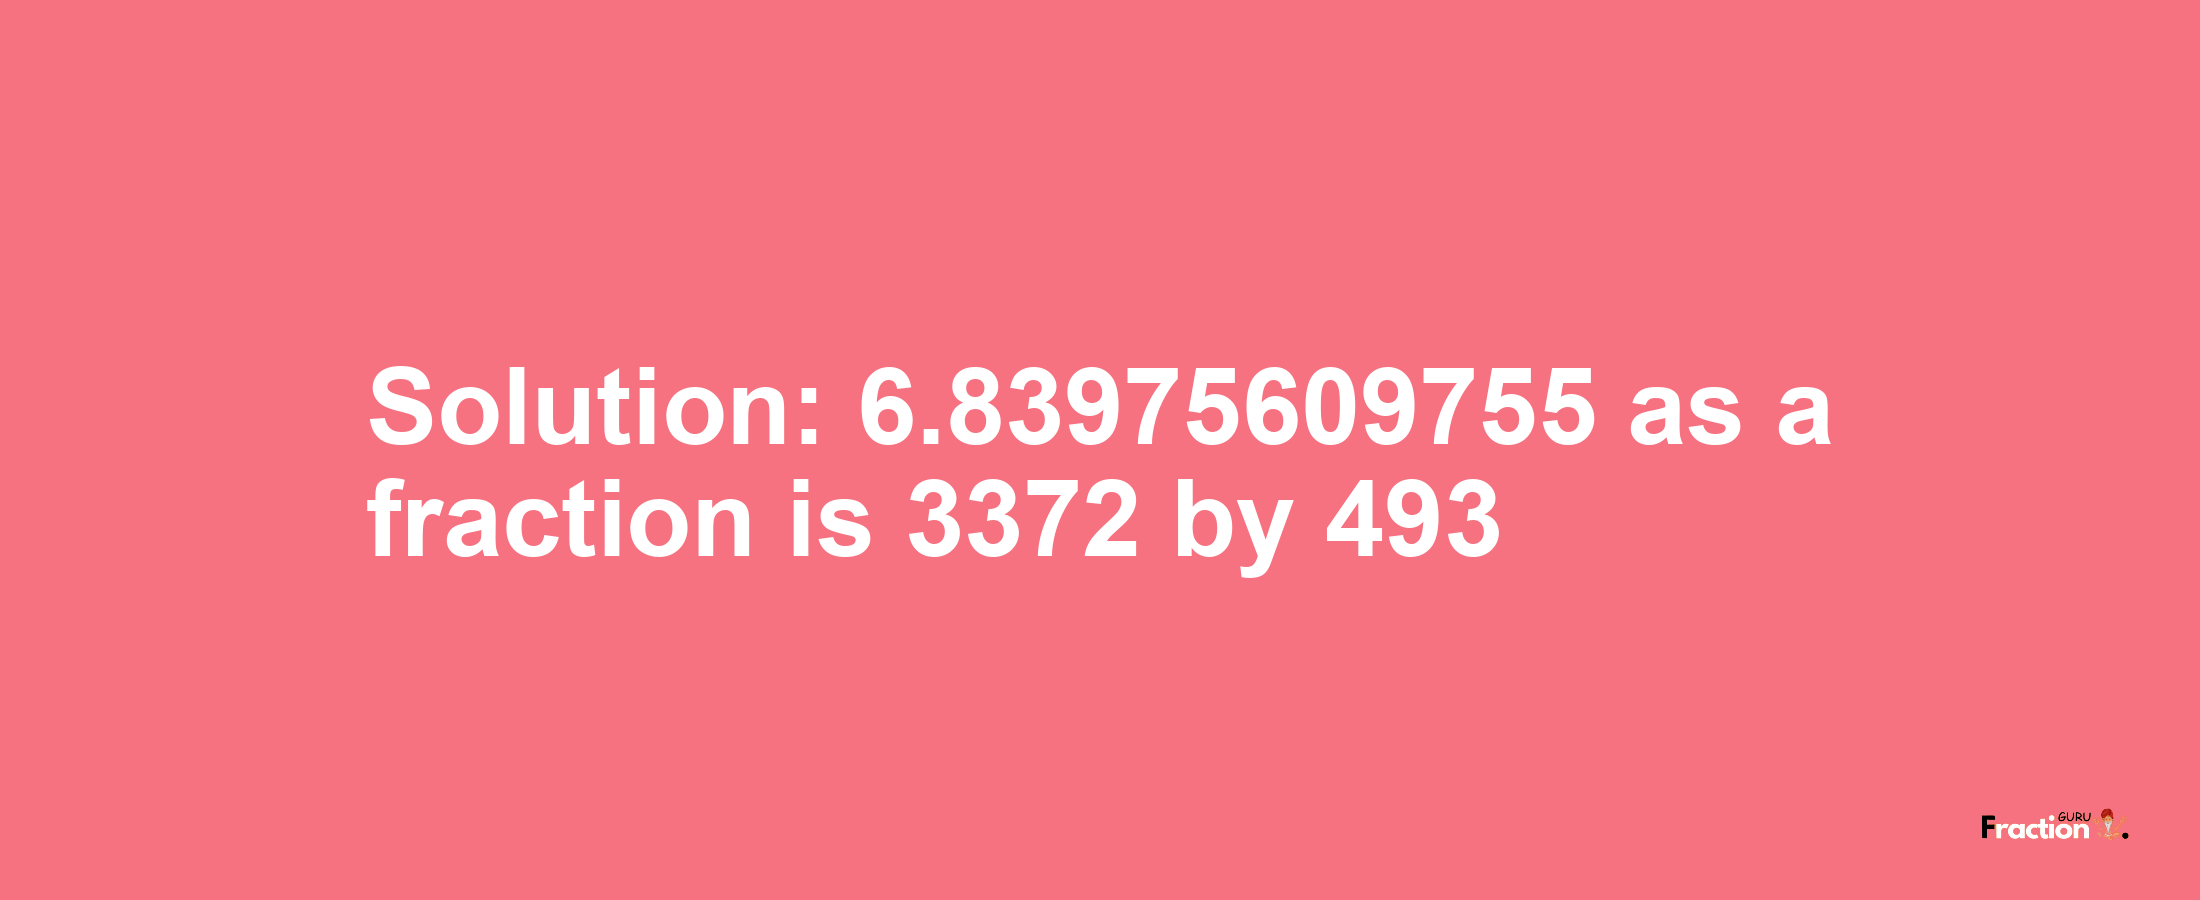 Solution:6.83975609755 as a fraction is 3372/493